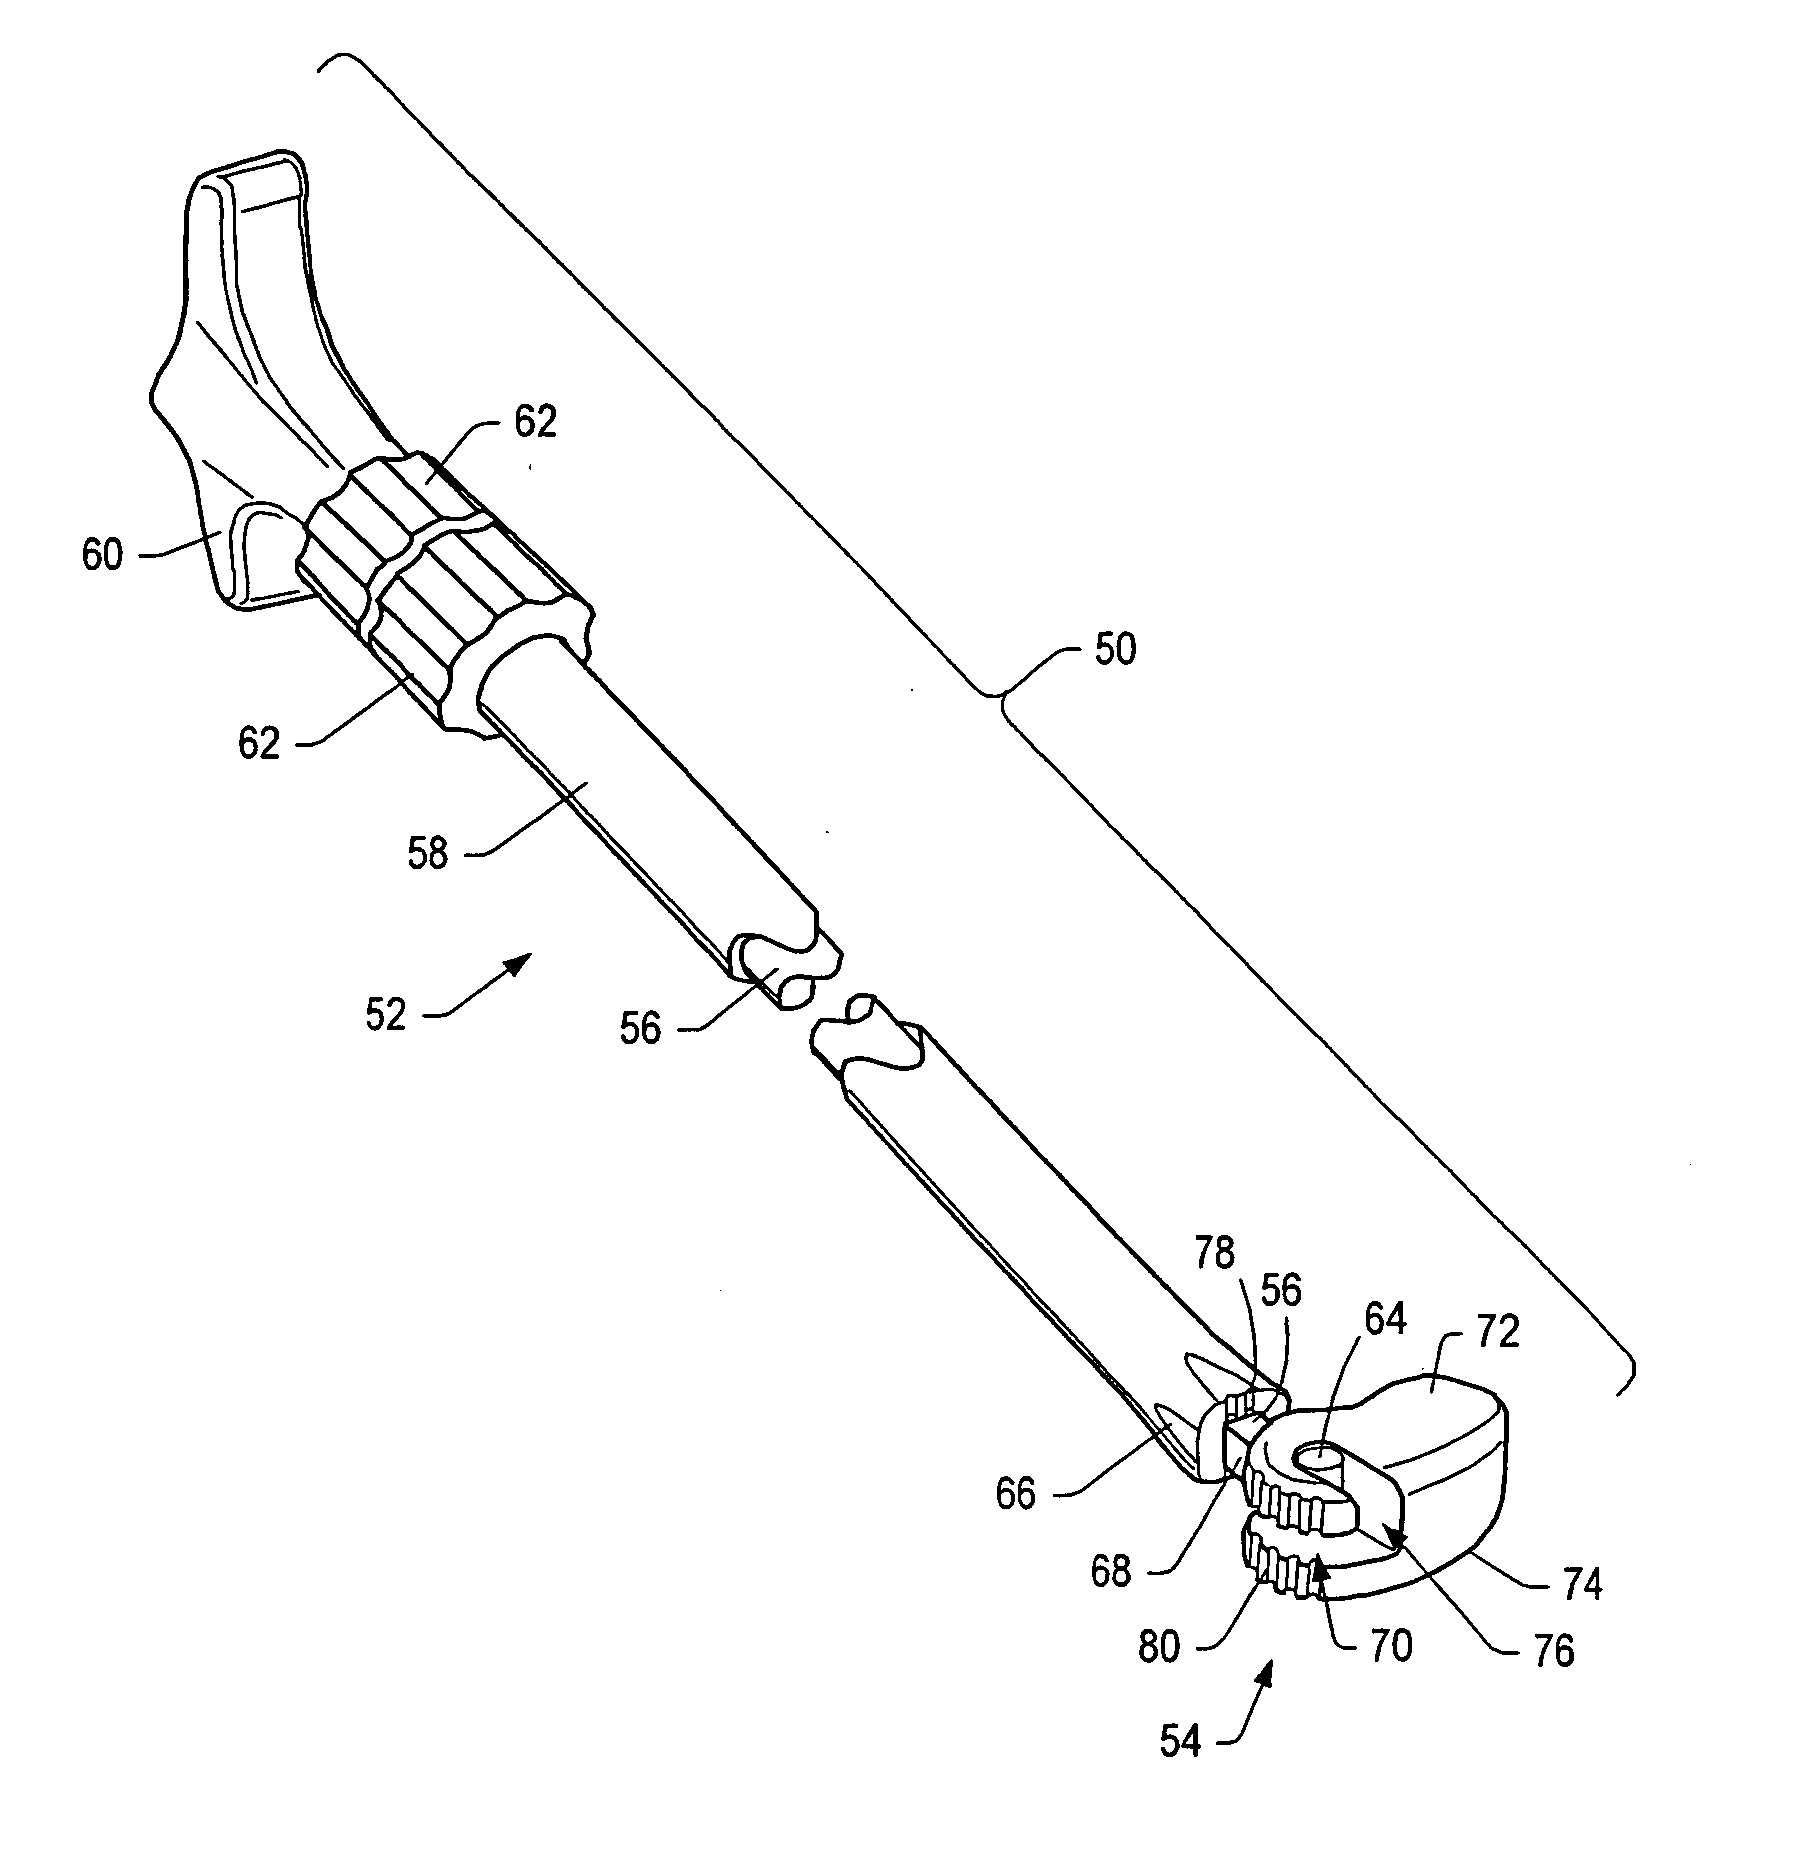 Variable angle spinal surgery instrument